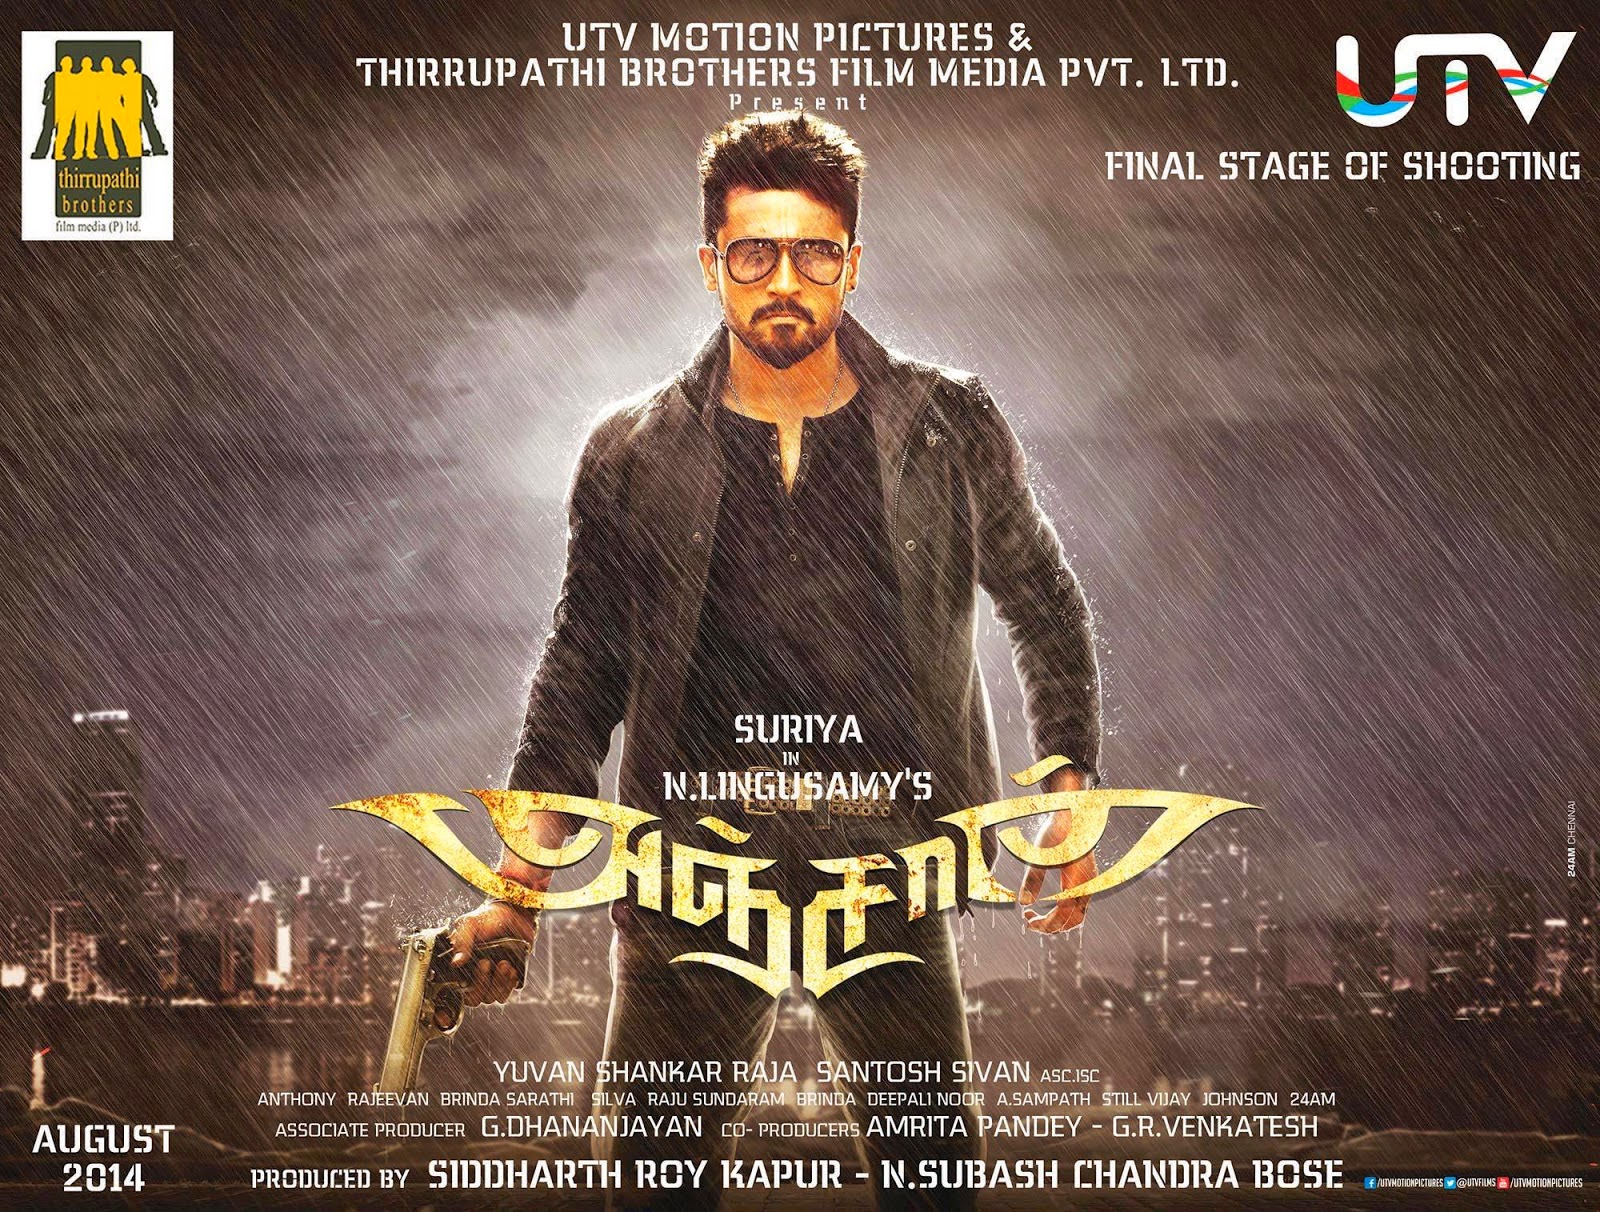 Anjaan Working Stills and latest wallpapers Hd Posters - Filmy Reels